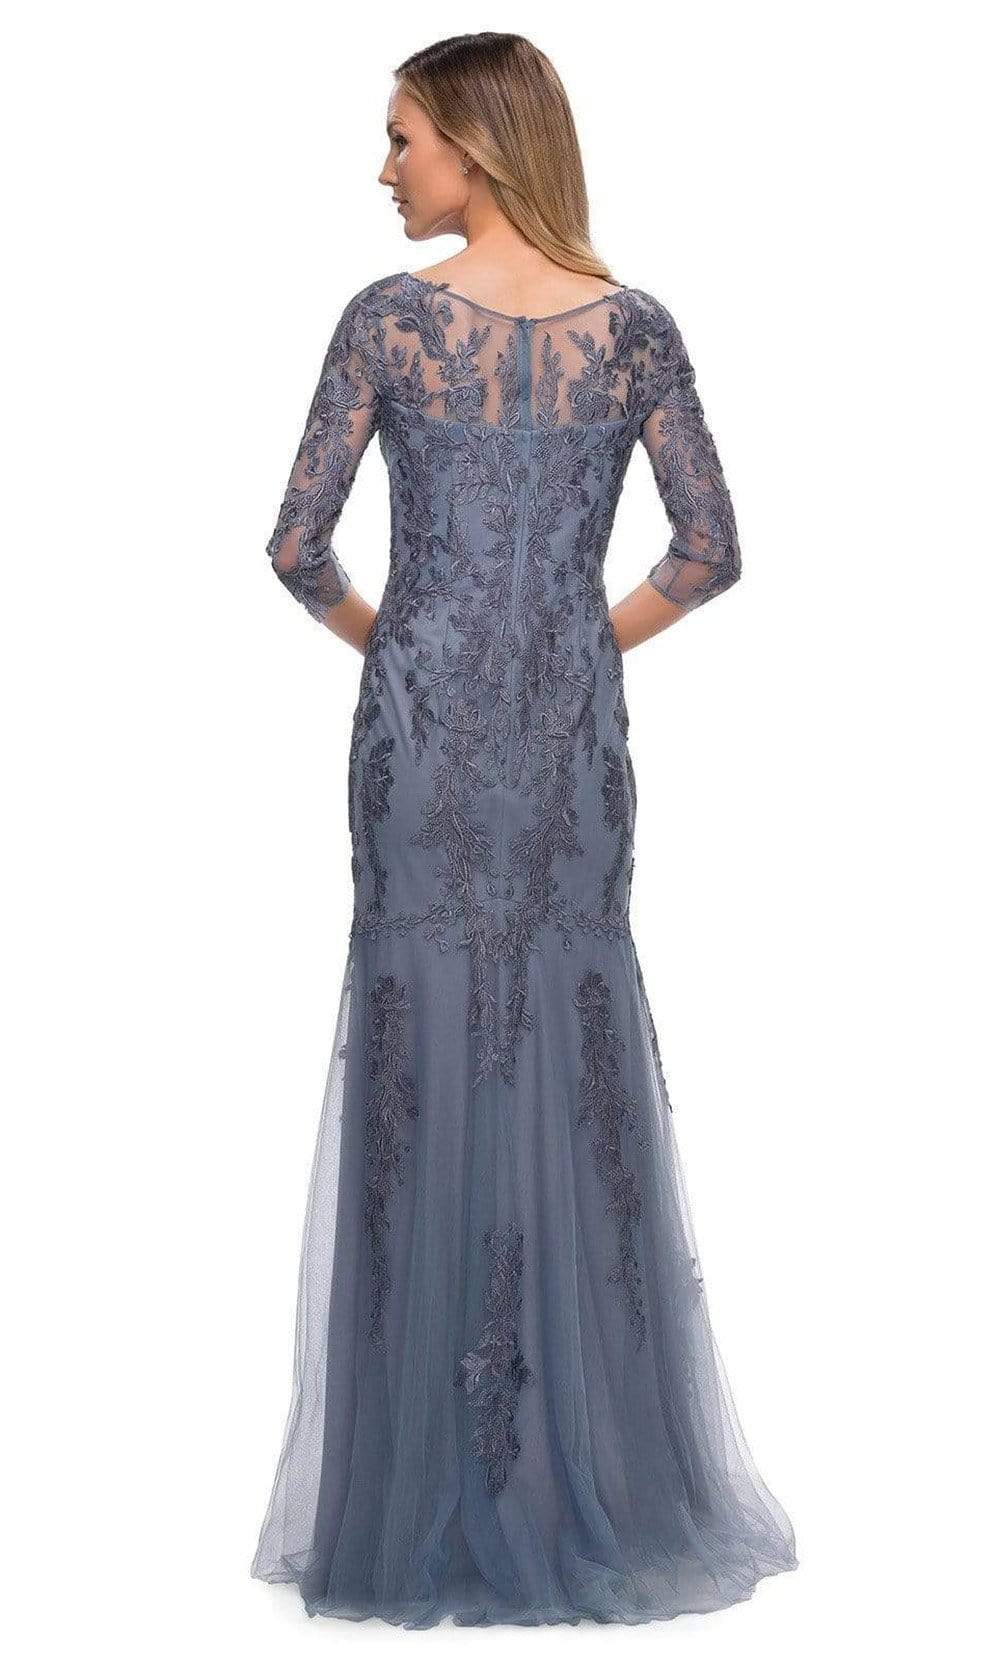 La Femme 29226 Embroidered Tulle Sheath Gown - 12